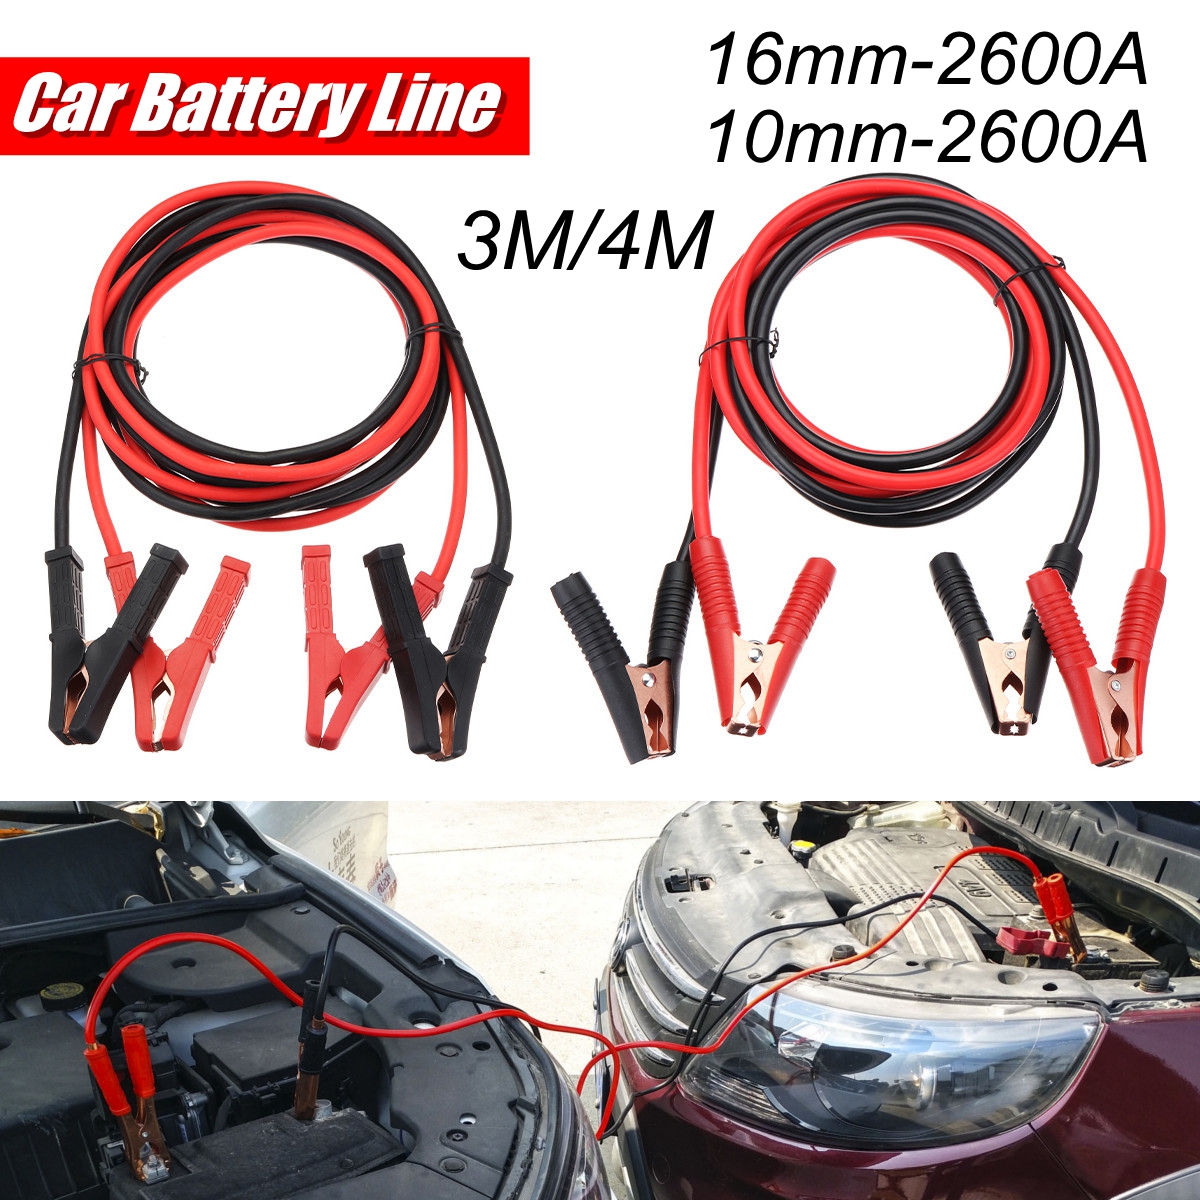 2600A-Car-Truck-Battery-Charger-Cable-Emergency-Power-Supply-Cord-Booster-Jumper-Cable-3M4M-1418257-1